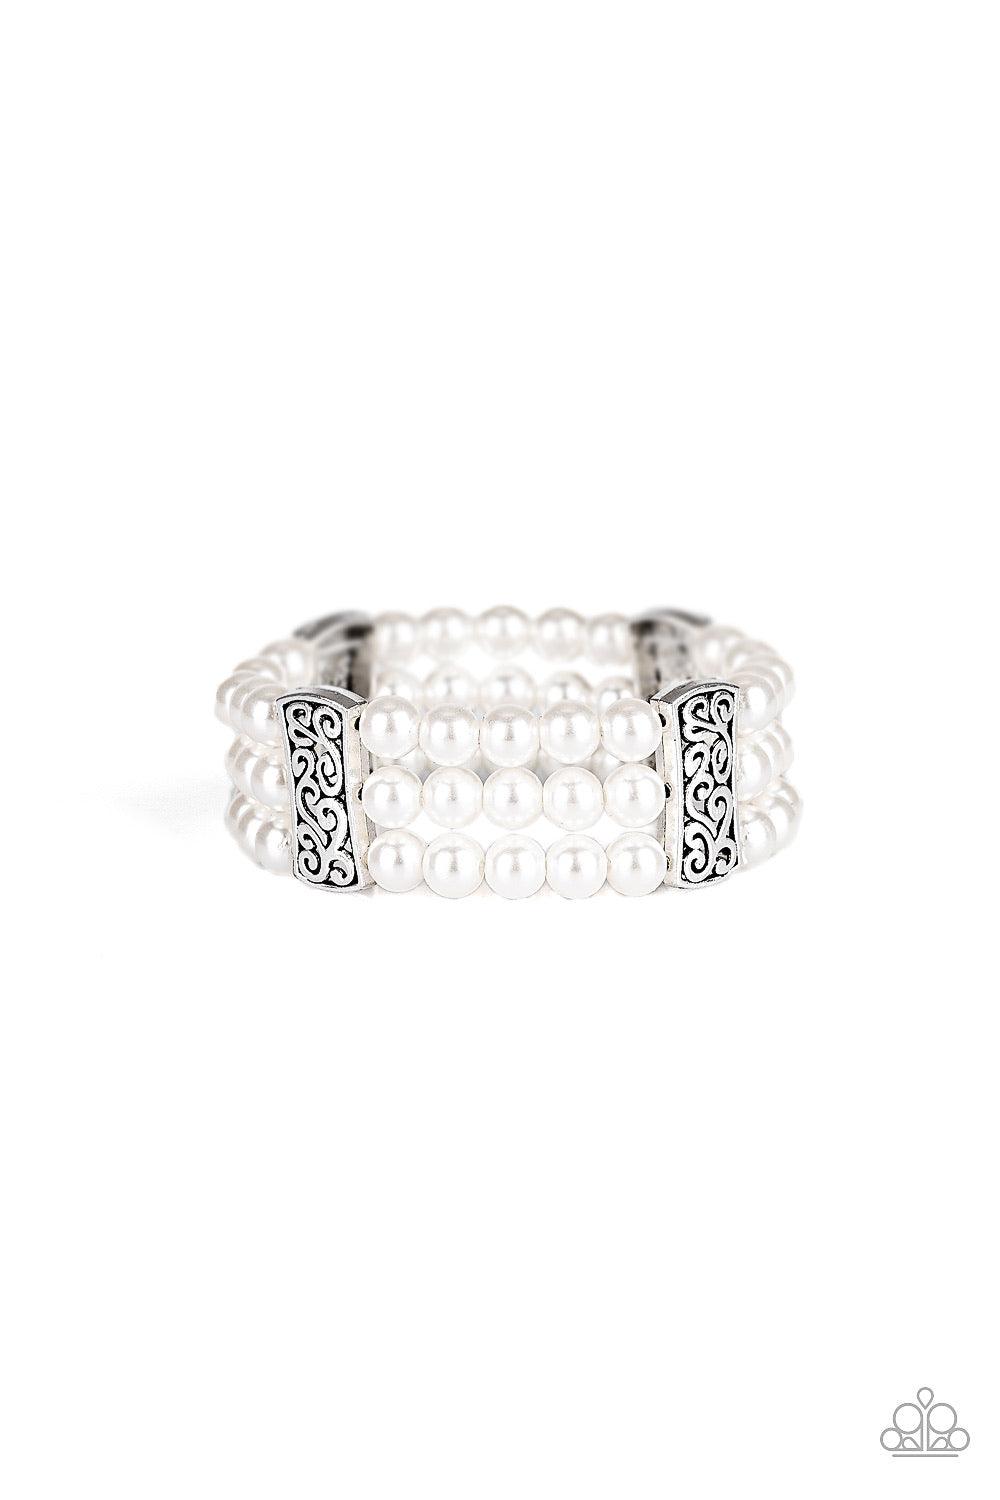 Paparazzi Accessories Ritzy Ritz - White Infused with ornate silver frames, row after row of white pearls are threaded along stretchy bands around the wrist for a refined flair. Jewelry